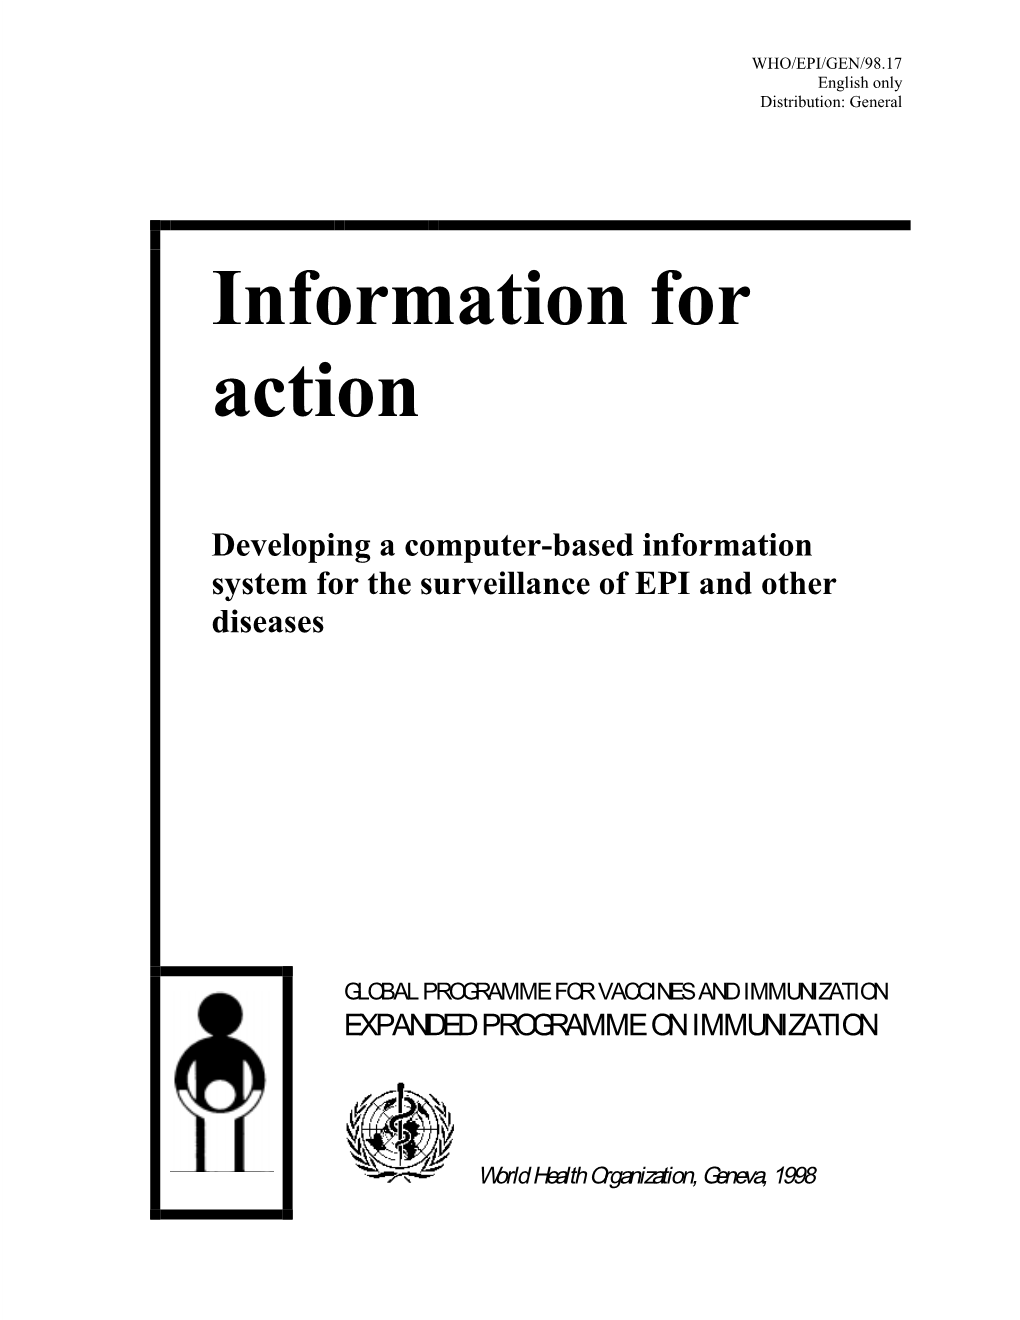 Information for Action